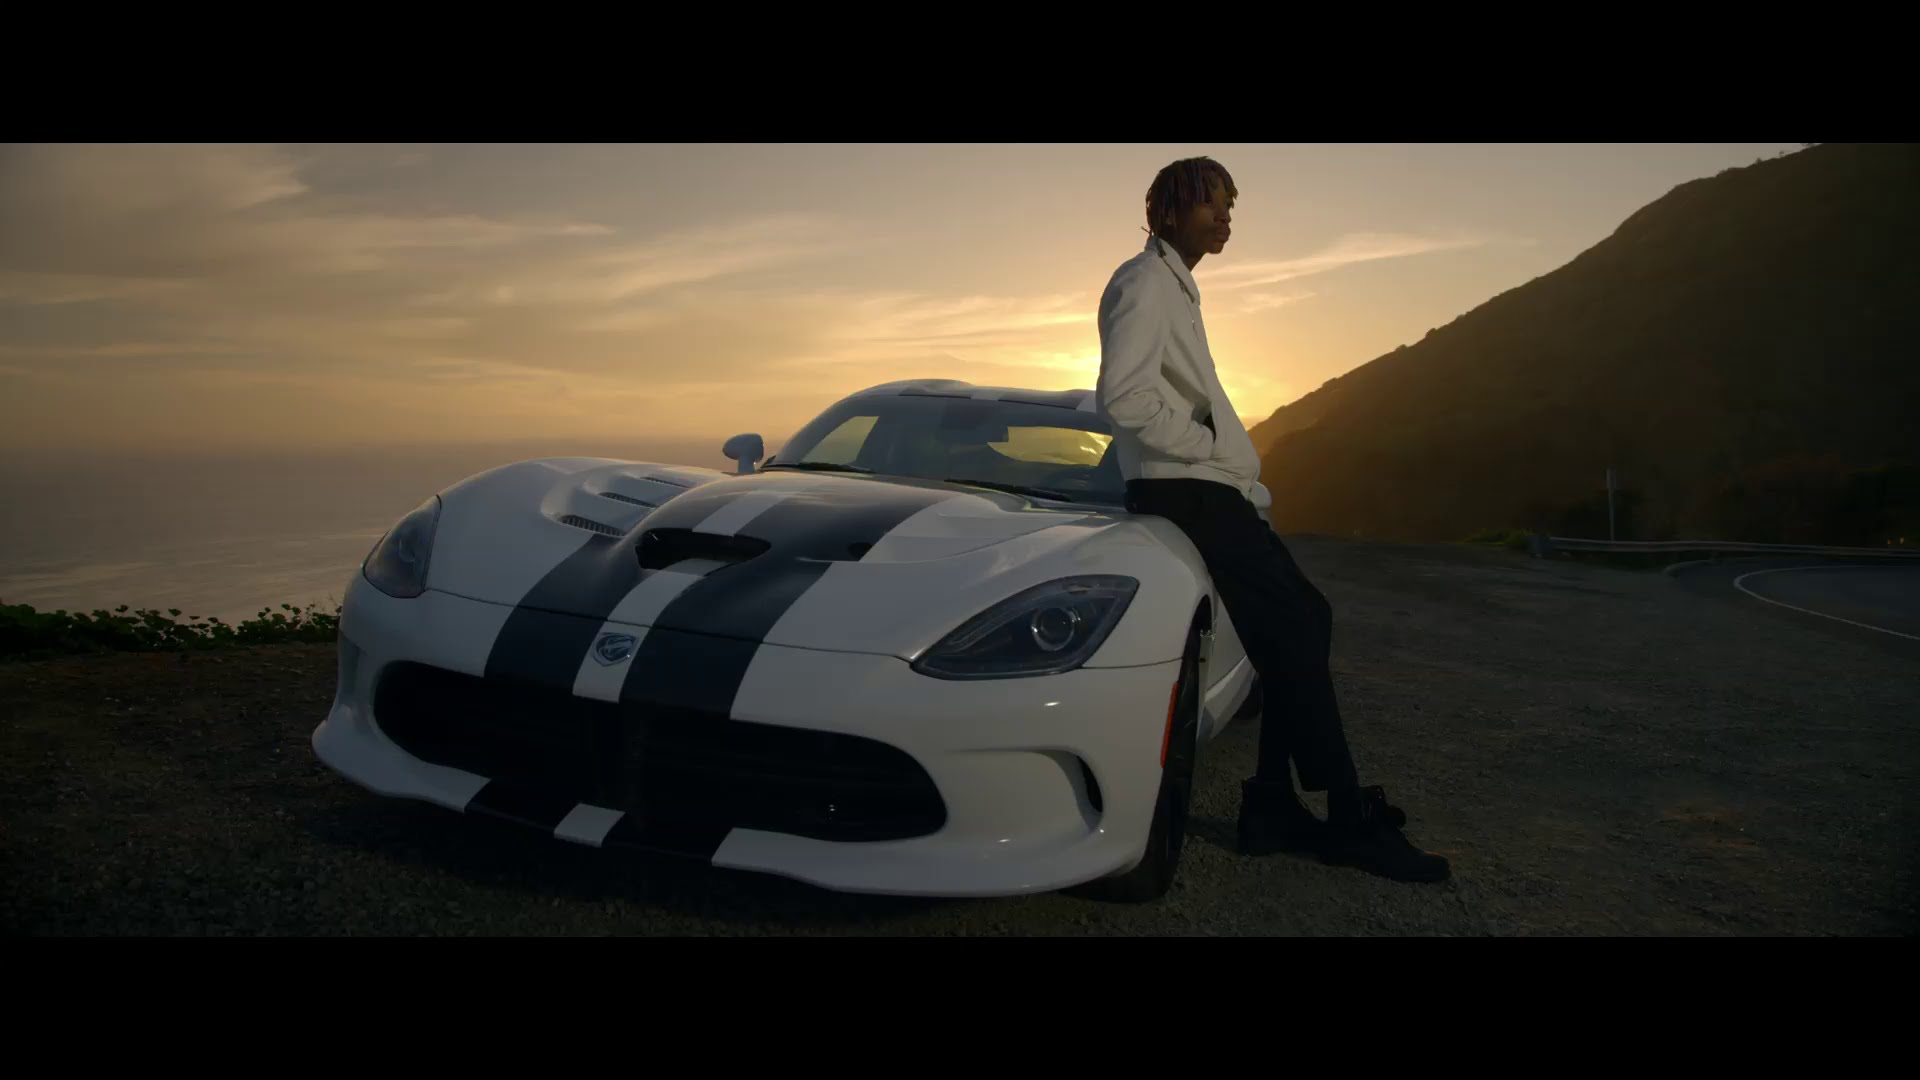 See You Again becomes the most viewed song on Youtube